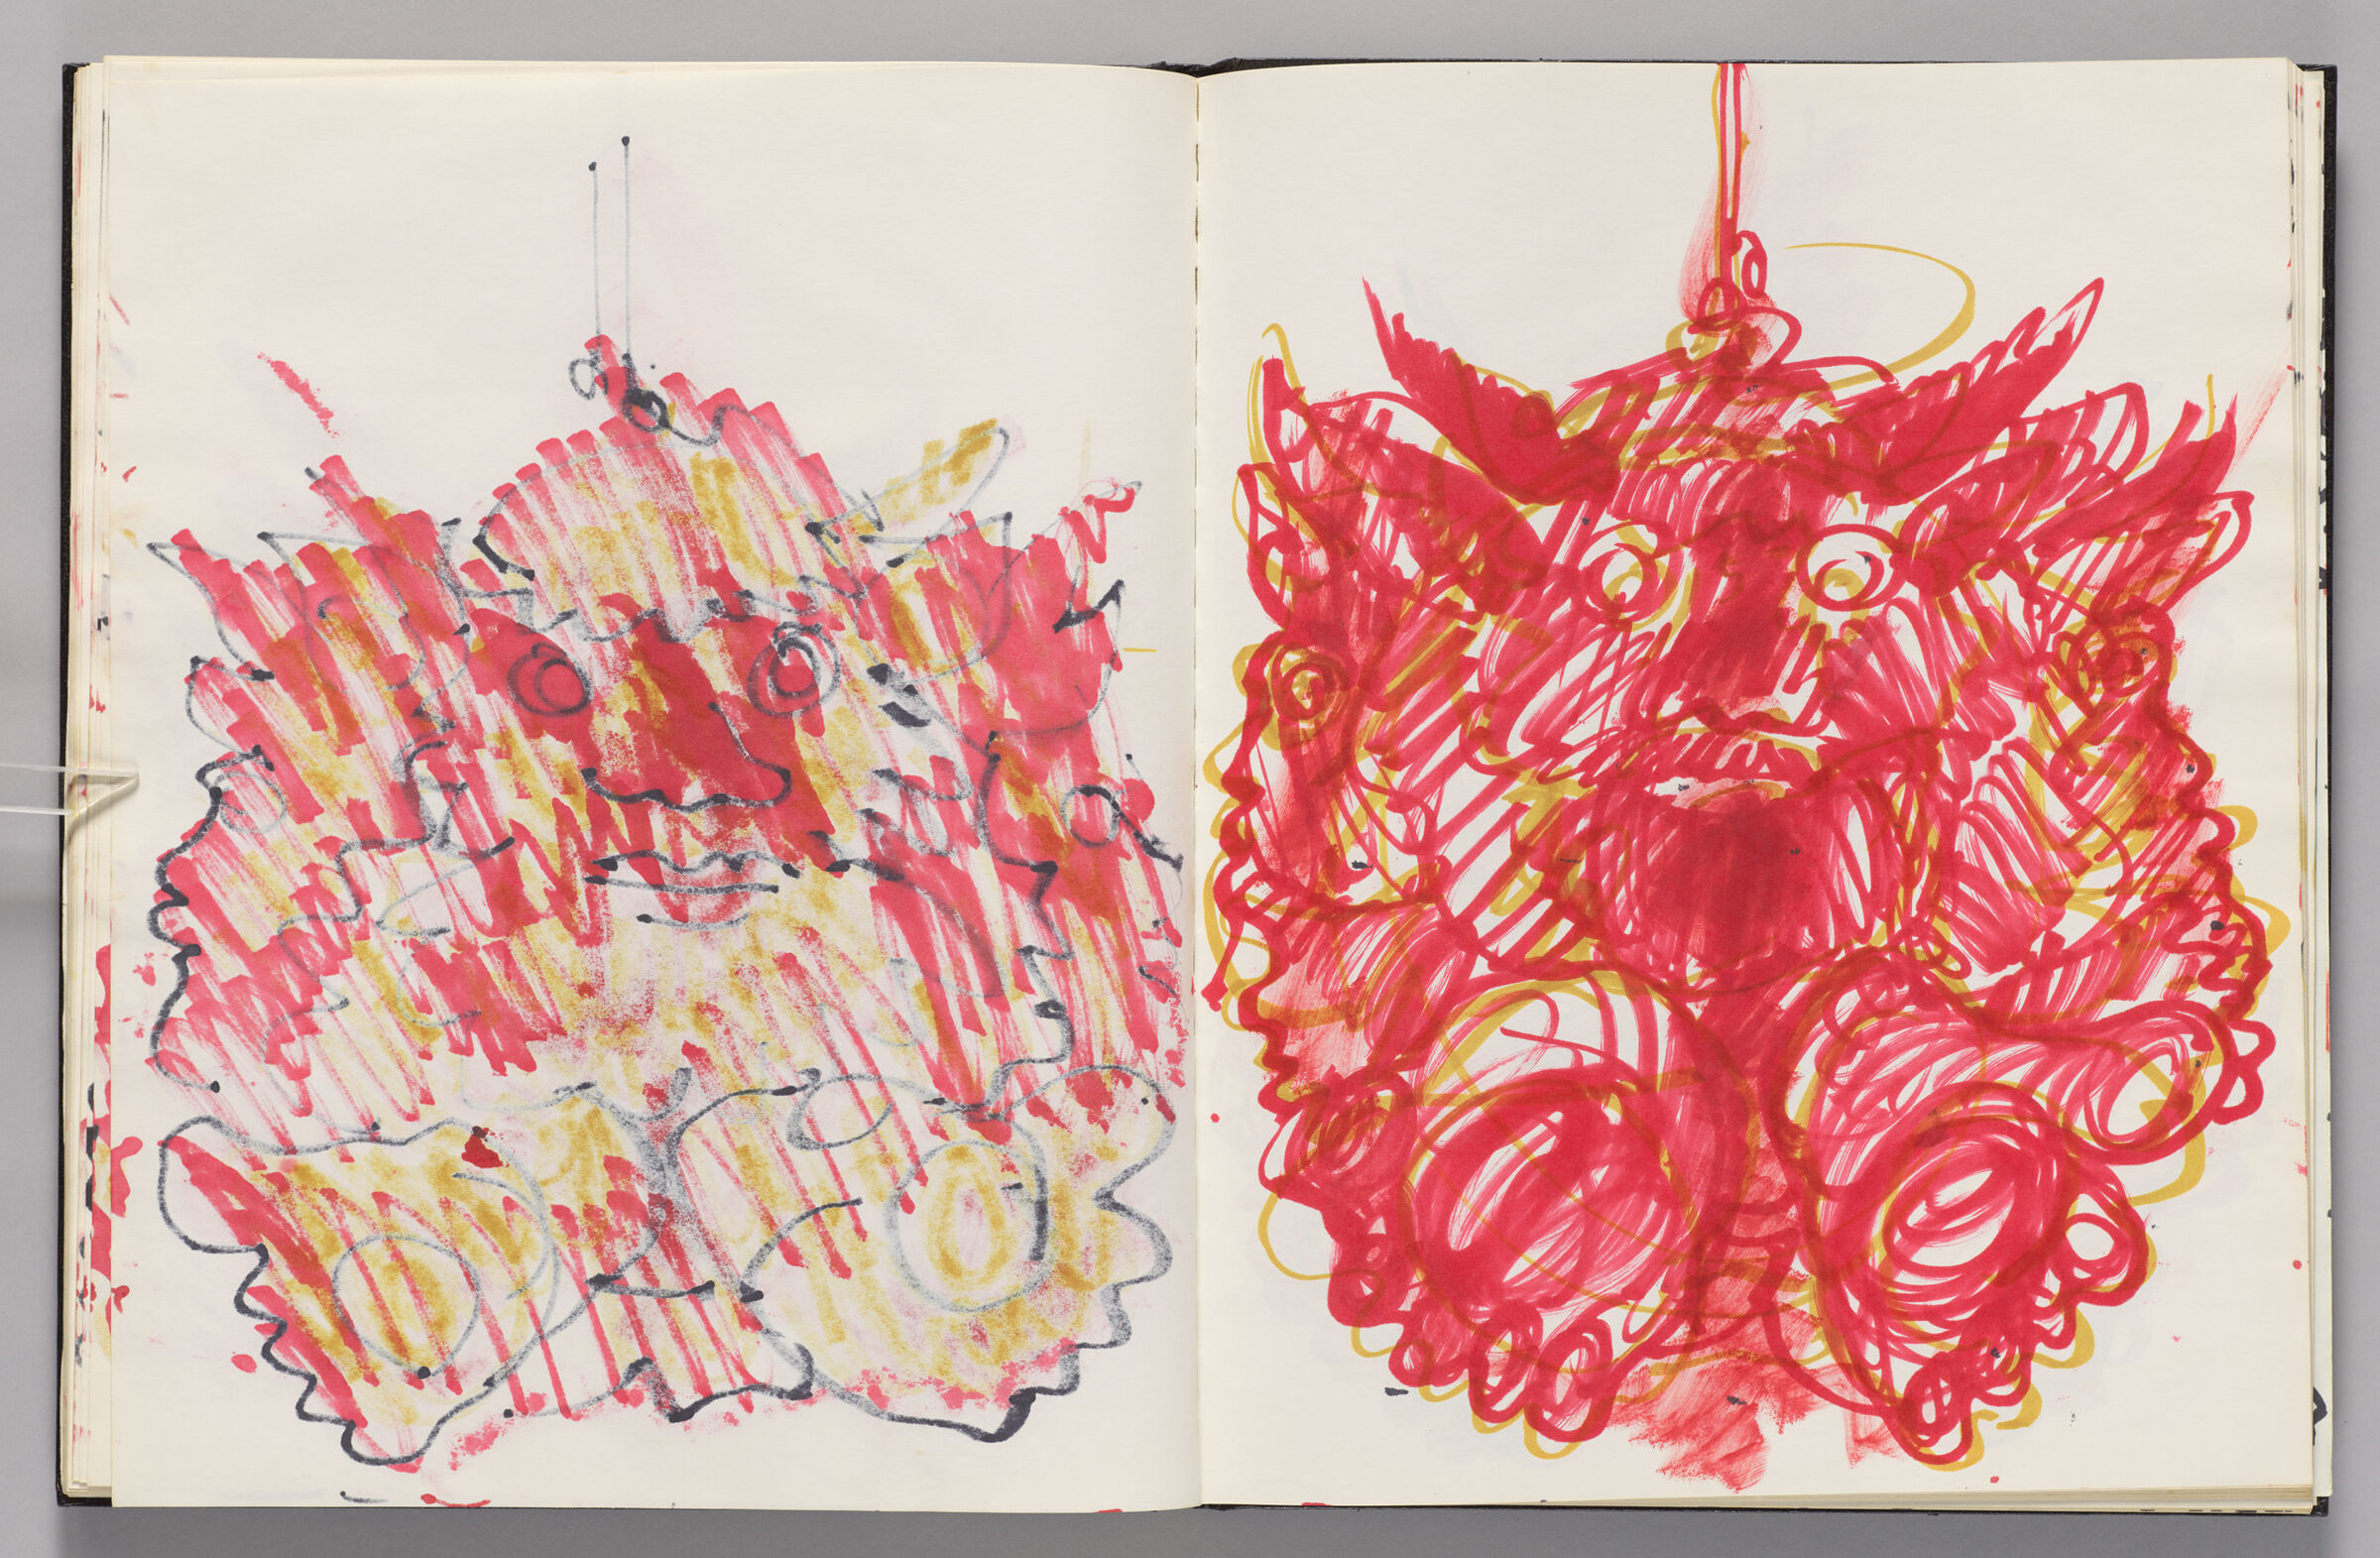 Untitled (Bleed-Through Of Previous Page, Left Page); Untitled (Close-Up Of Minotaurs, Right Page)